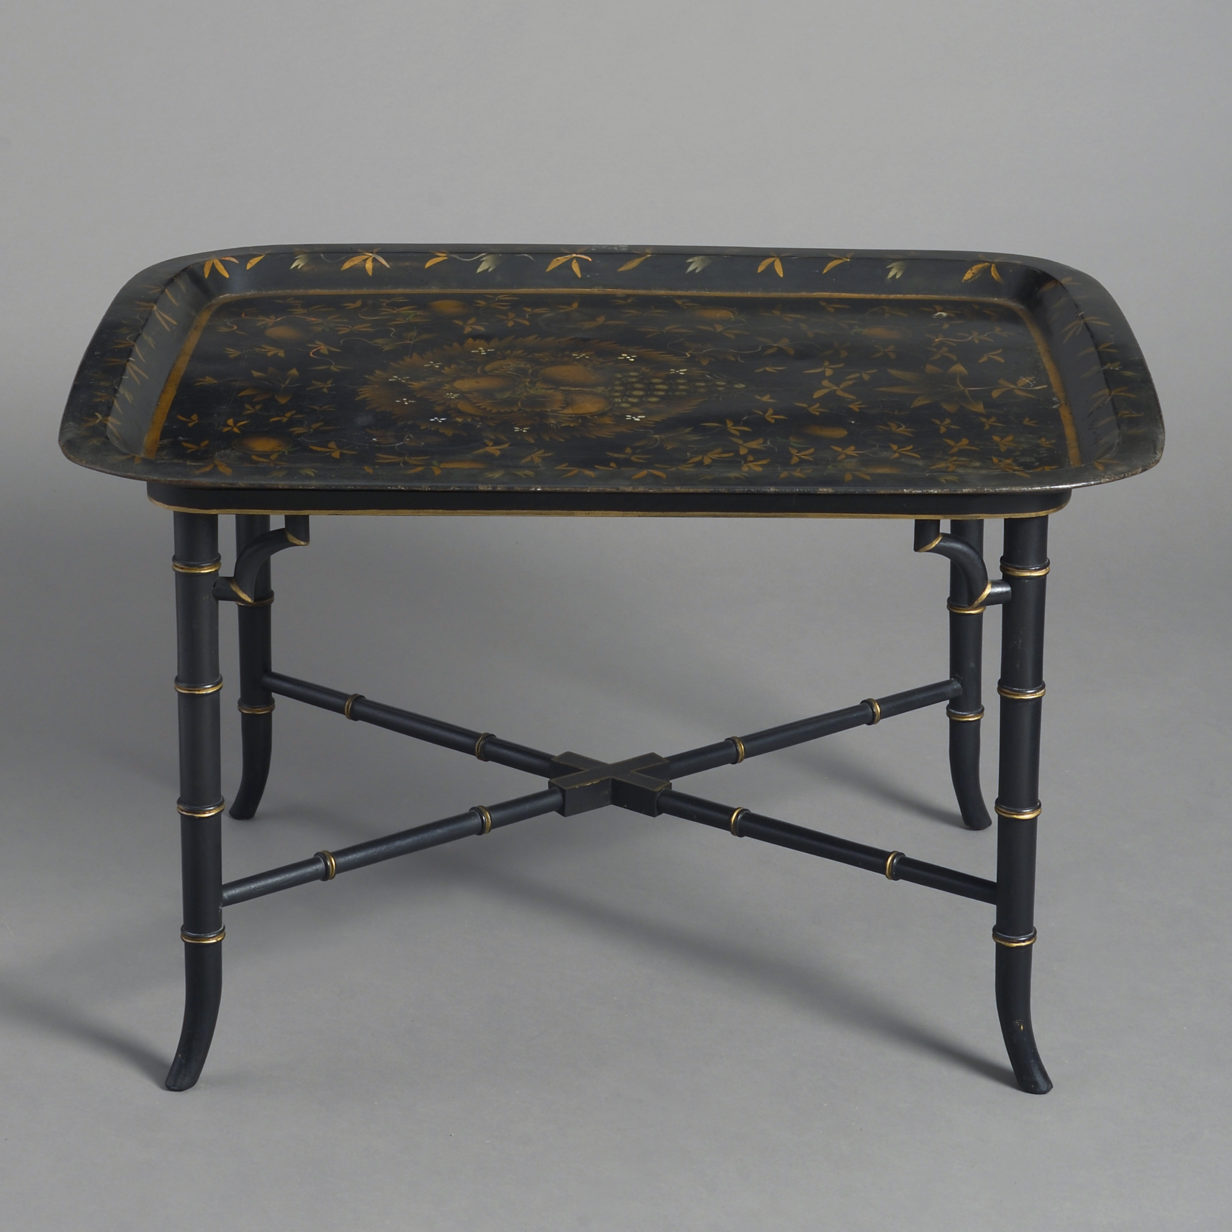 Early 19th Century Regency Period Tole Tray Table